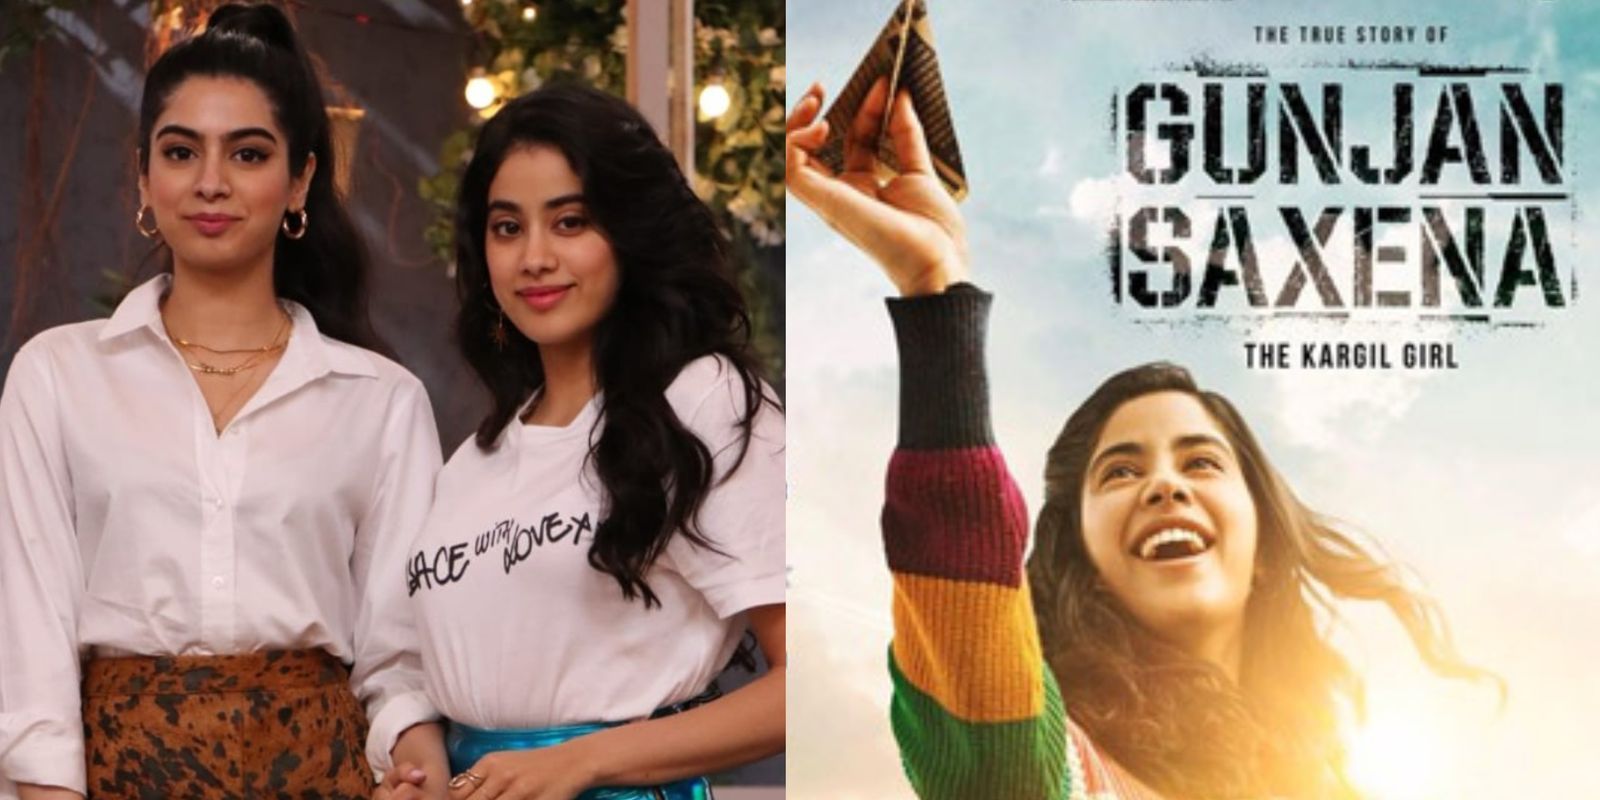 Janhvi Kapoor Opens Up About Her Sister Khushi; Feels Gunjan Saxena’s Biopic Has Given Her Confidence